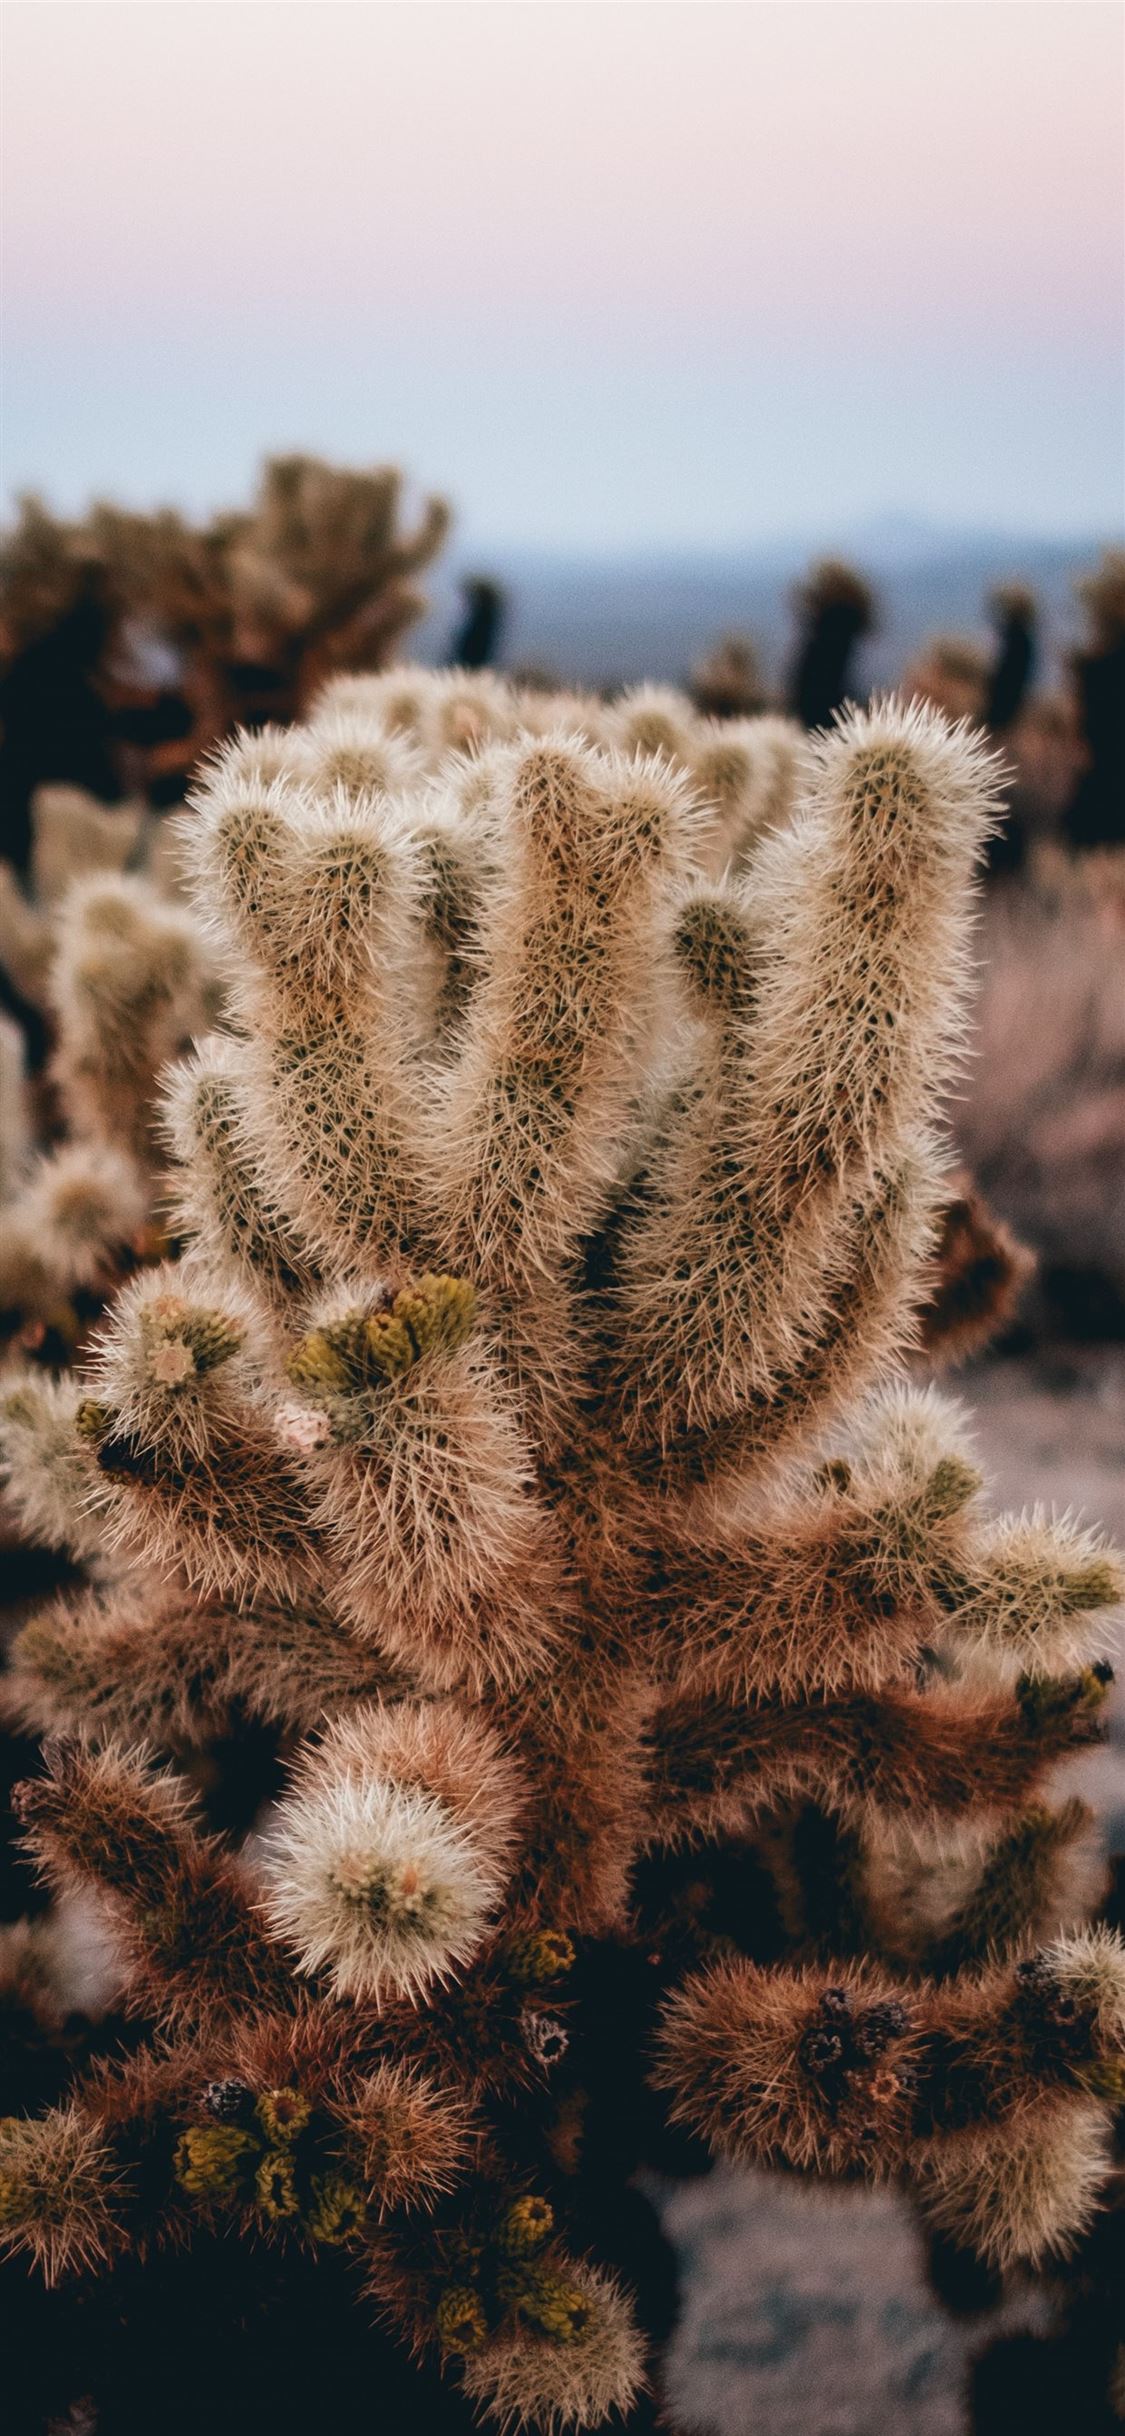 Cactus Iphone Wallpapers